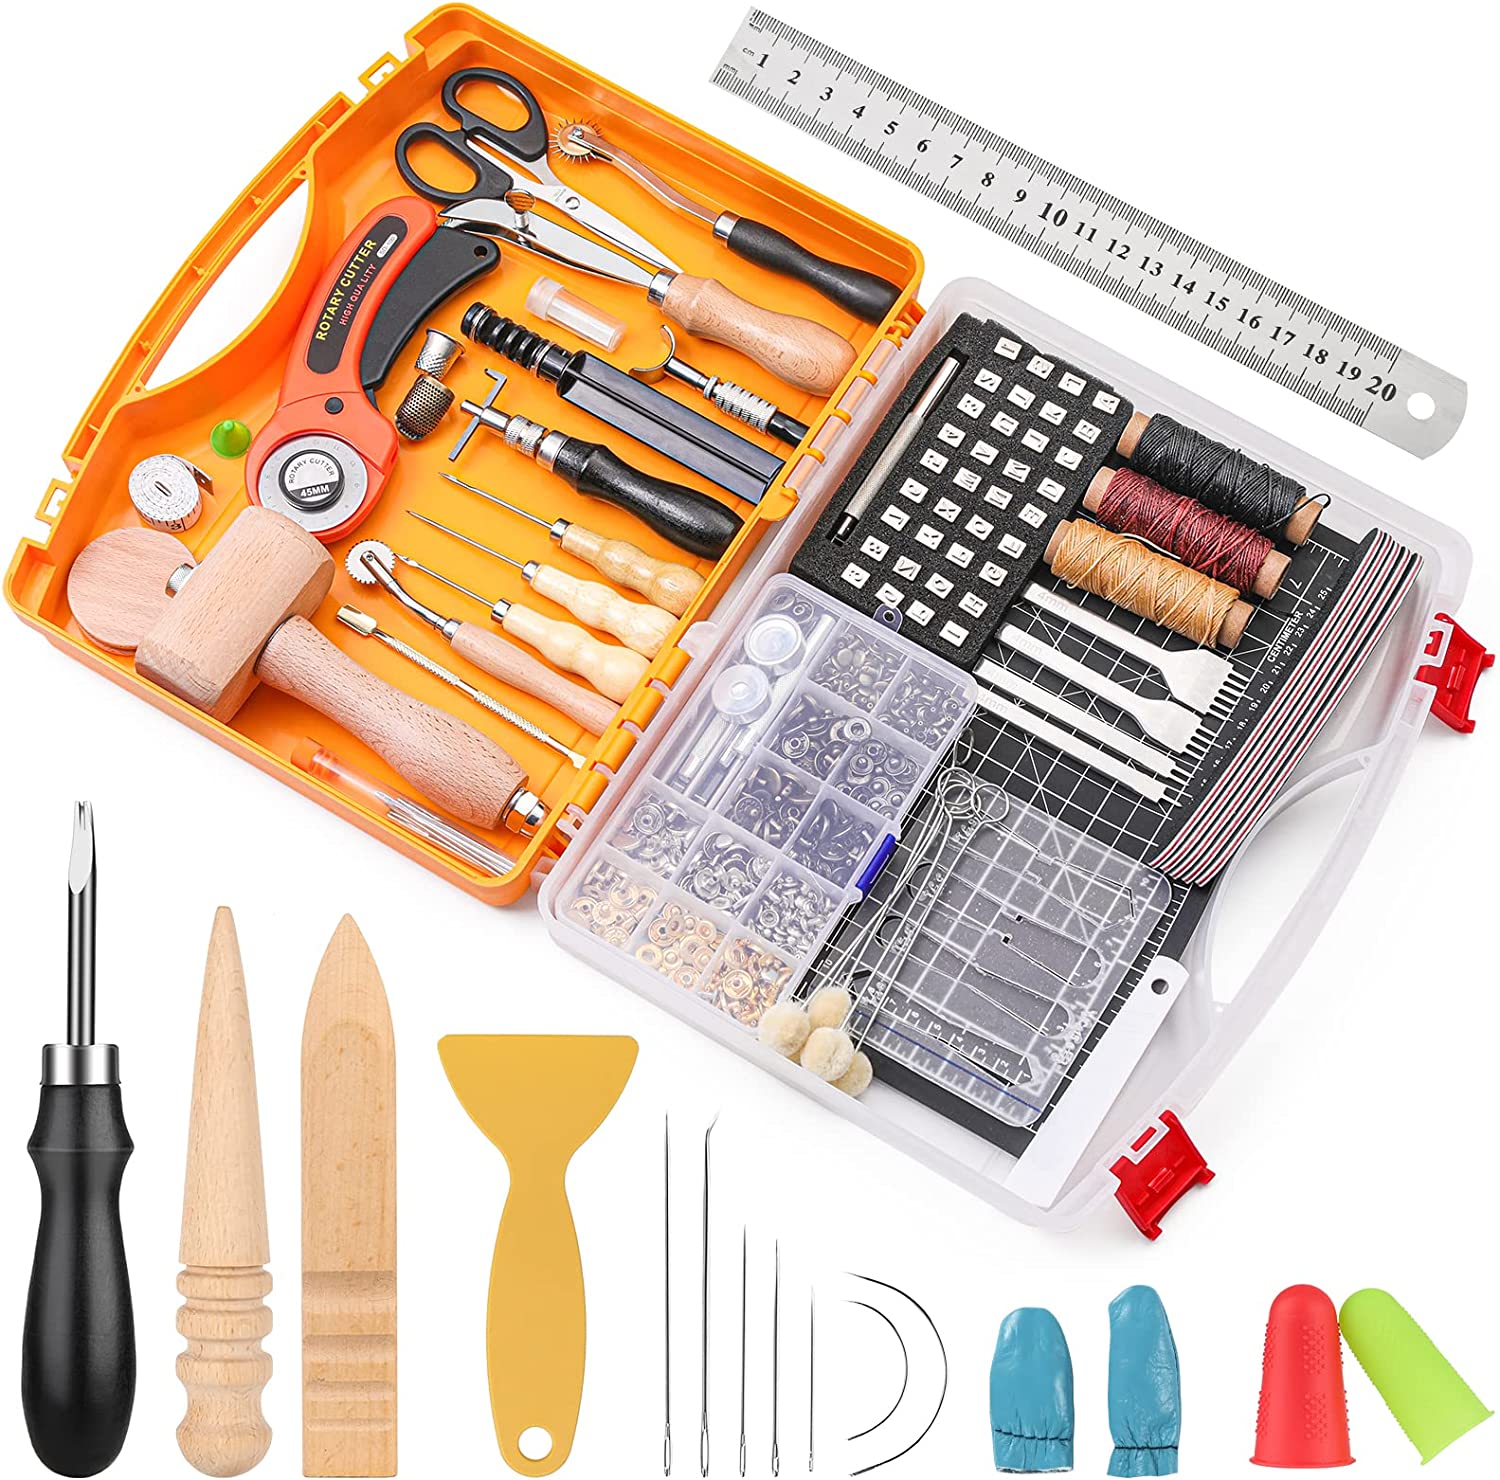 185 Pcs Leather Working Tools, Leather Working Tools and Supplies, Kit with Rotary Cutter and Mat, Hammer Stamping Tools, Awl, Tape Measure, Hand